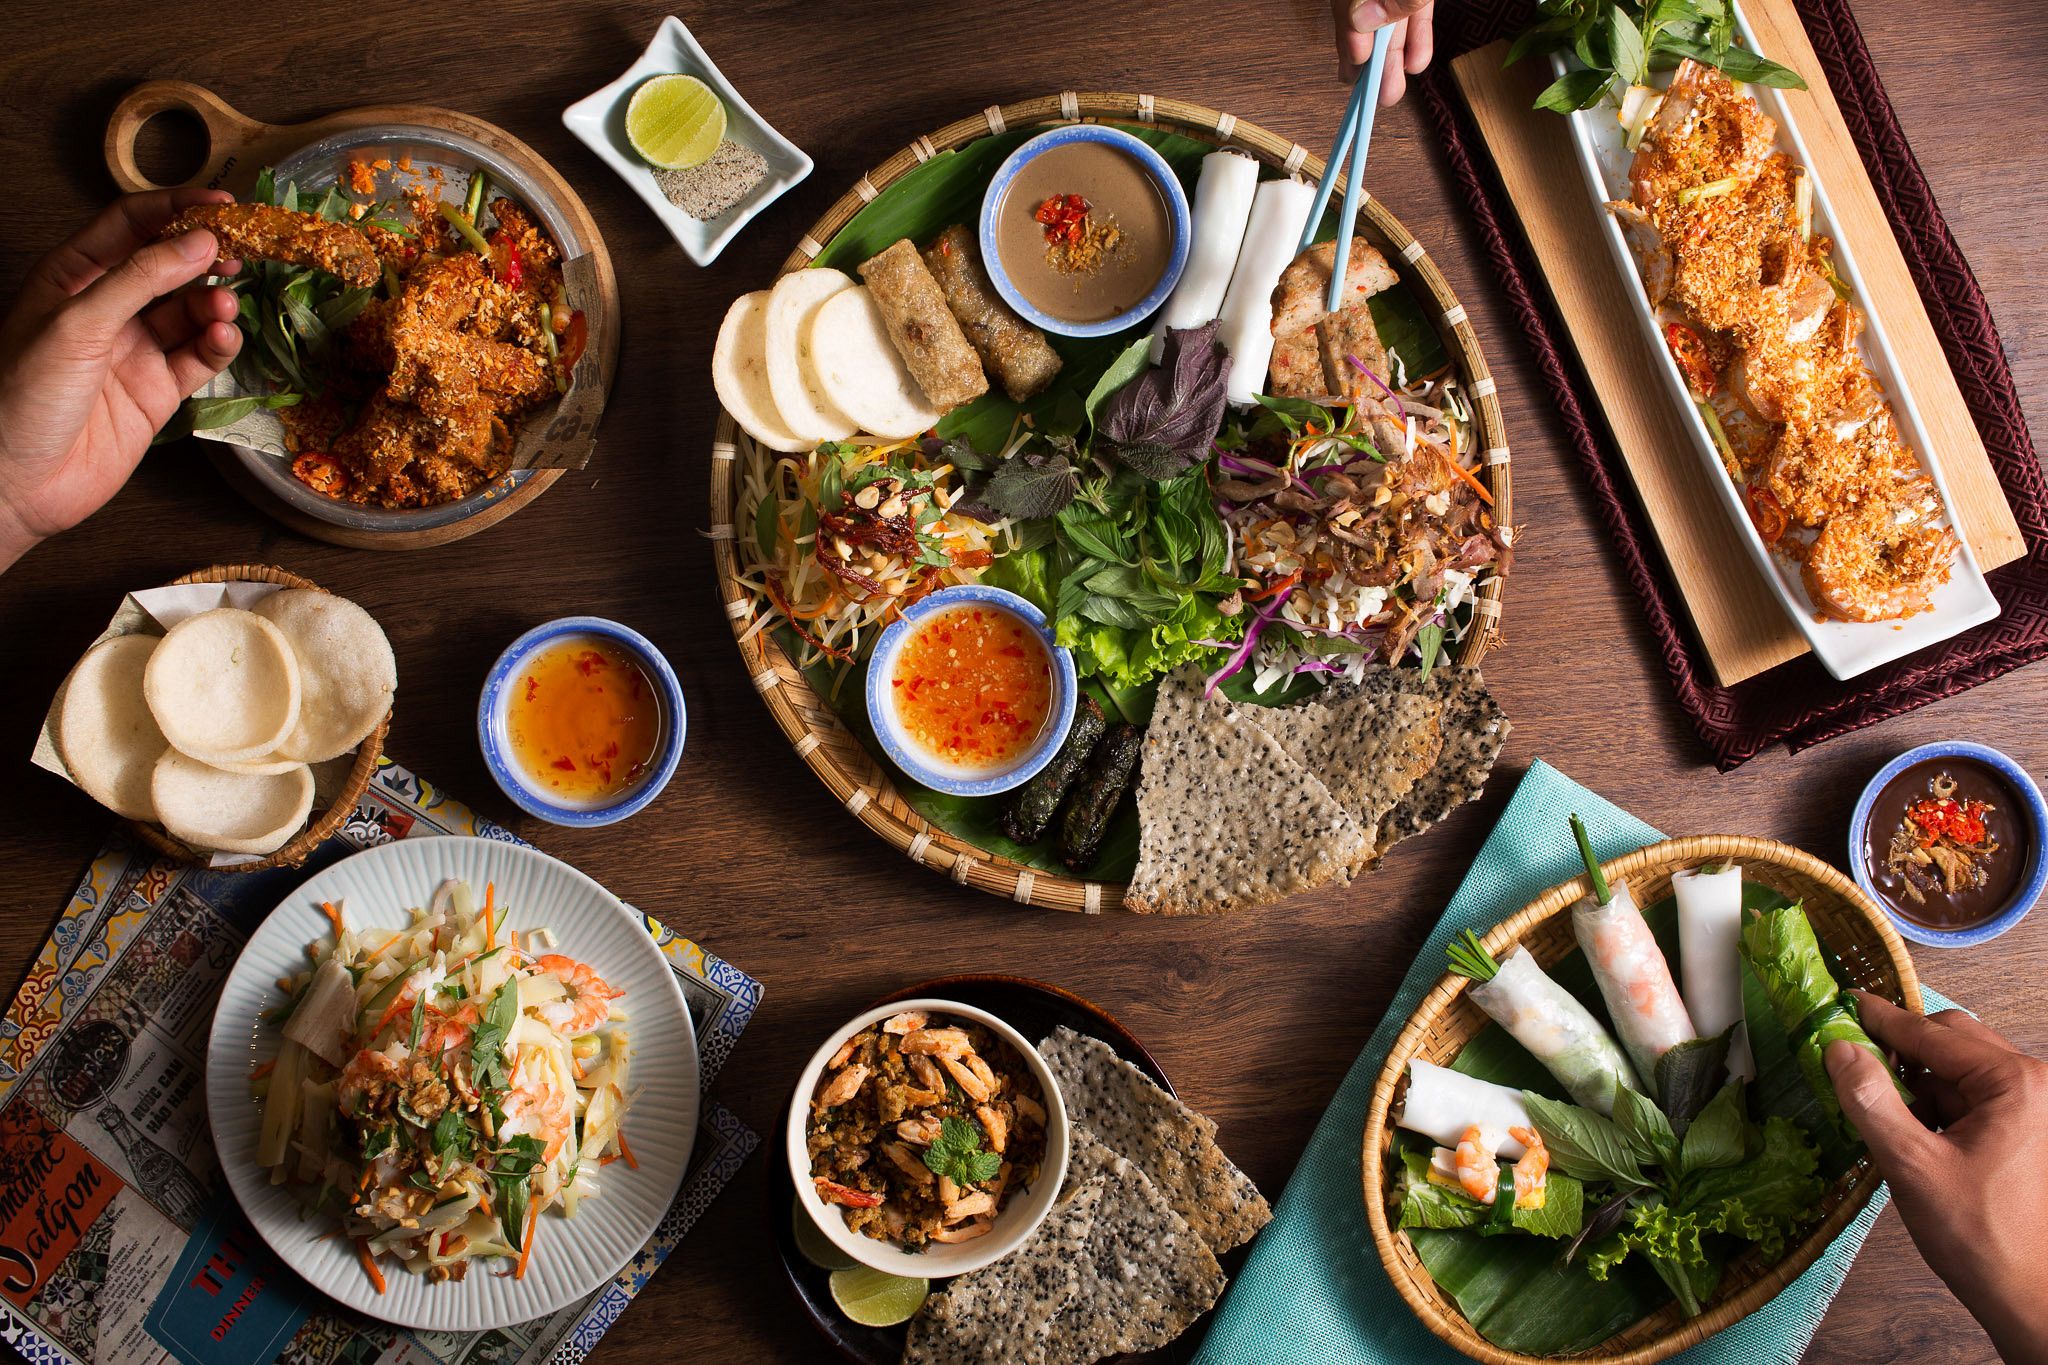 There is a mix of diverse cuisine in Saigon